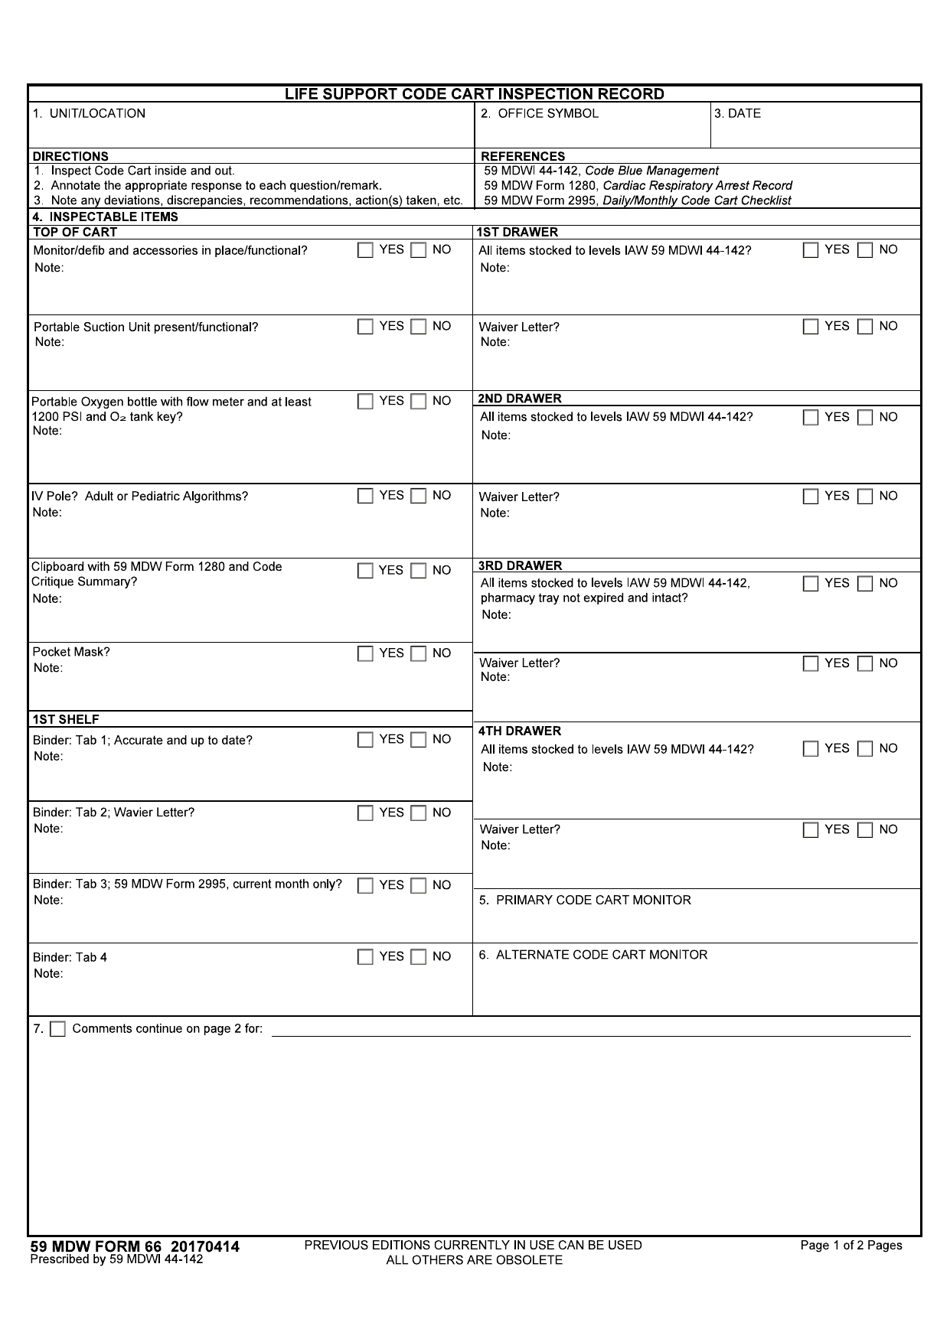 59 MDW Form 66 Life Support Code Cart Inspection Record, Page 1